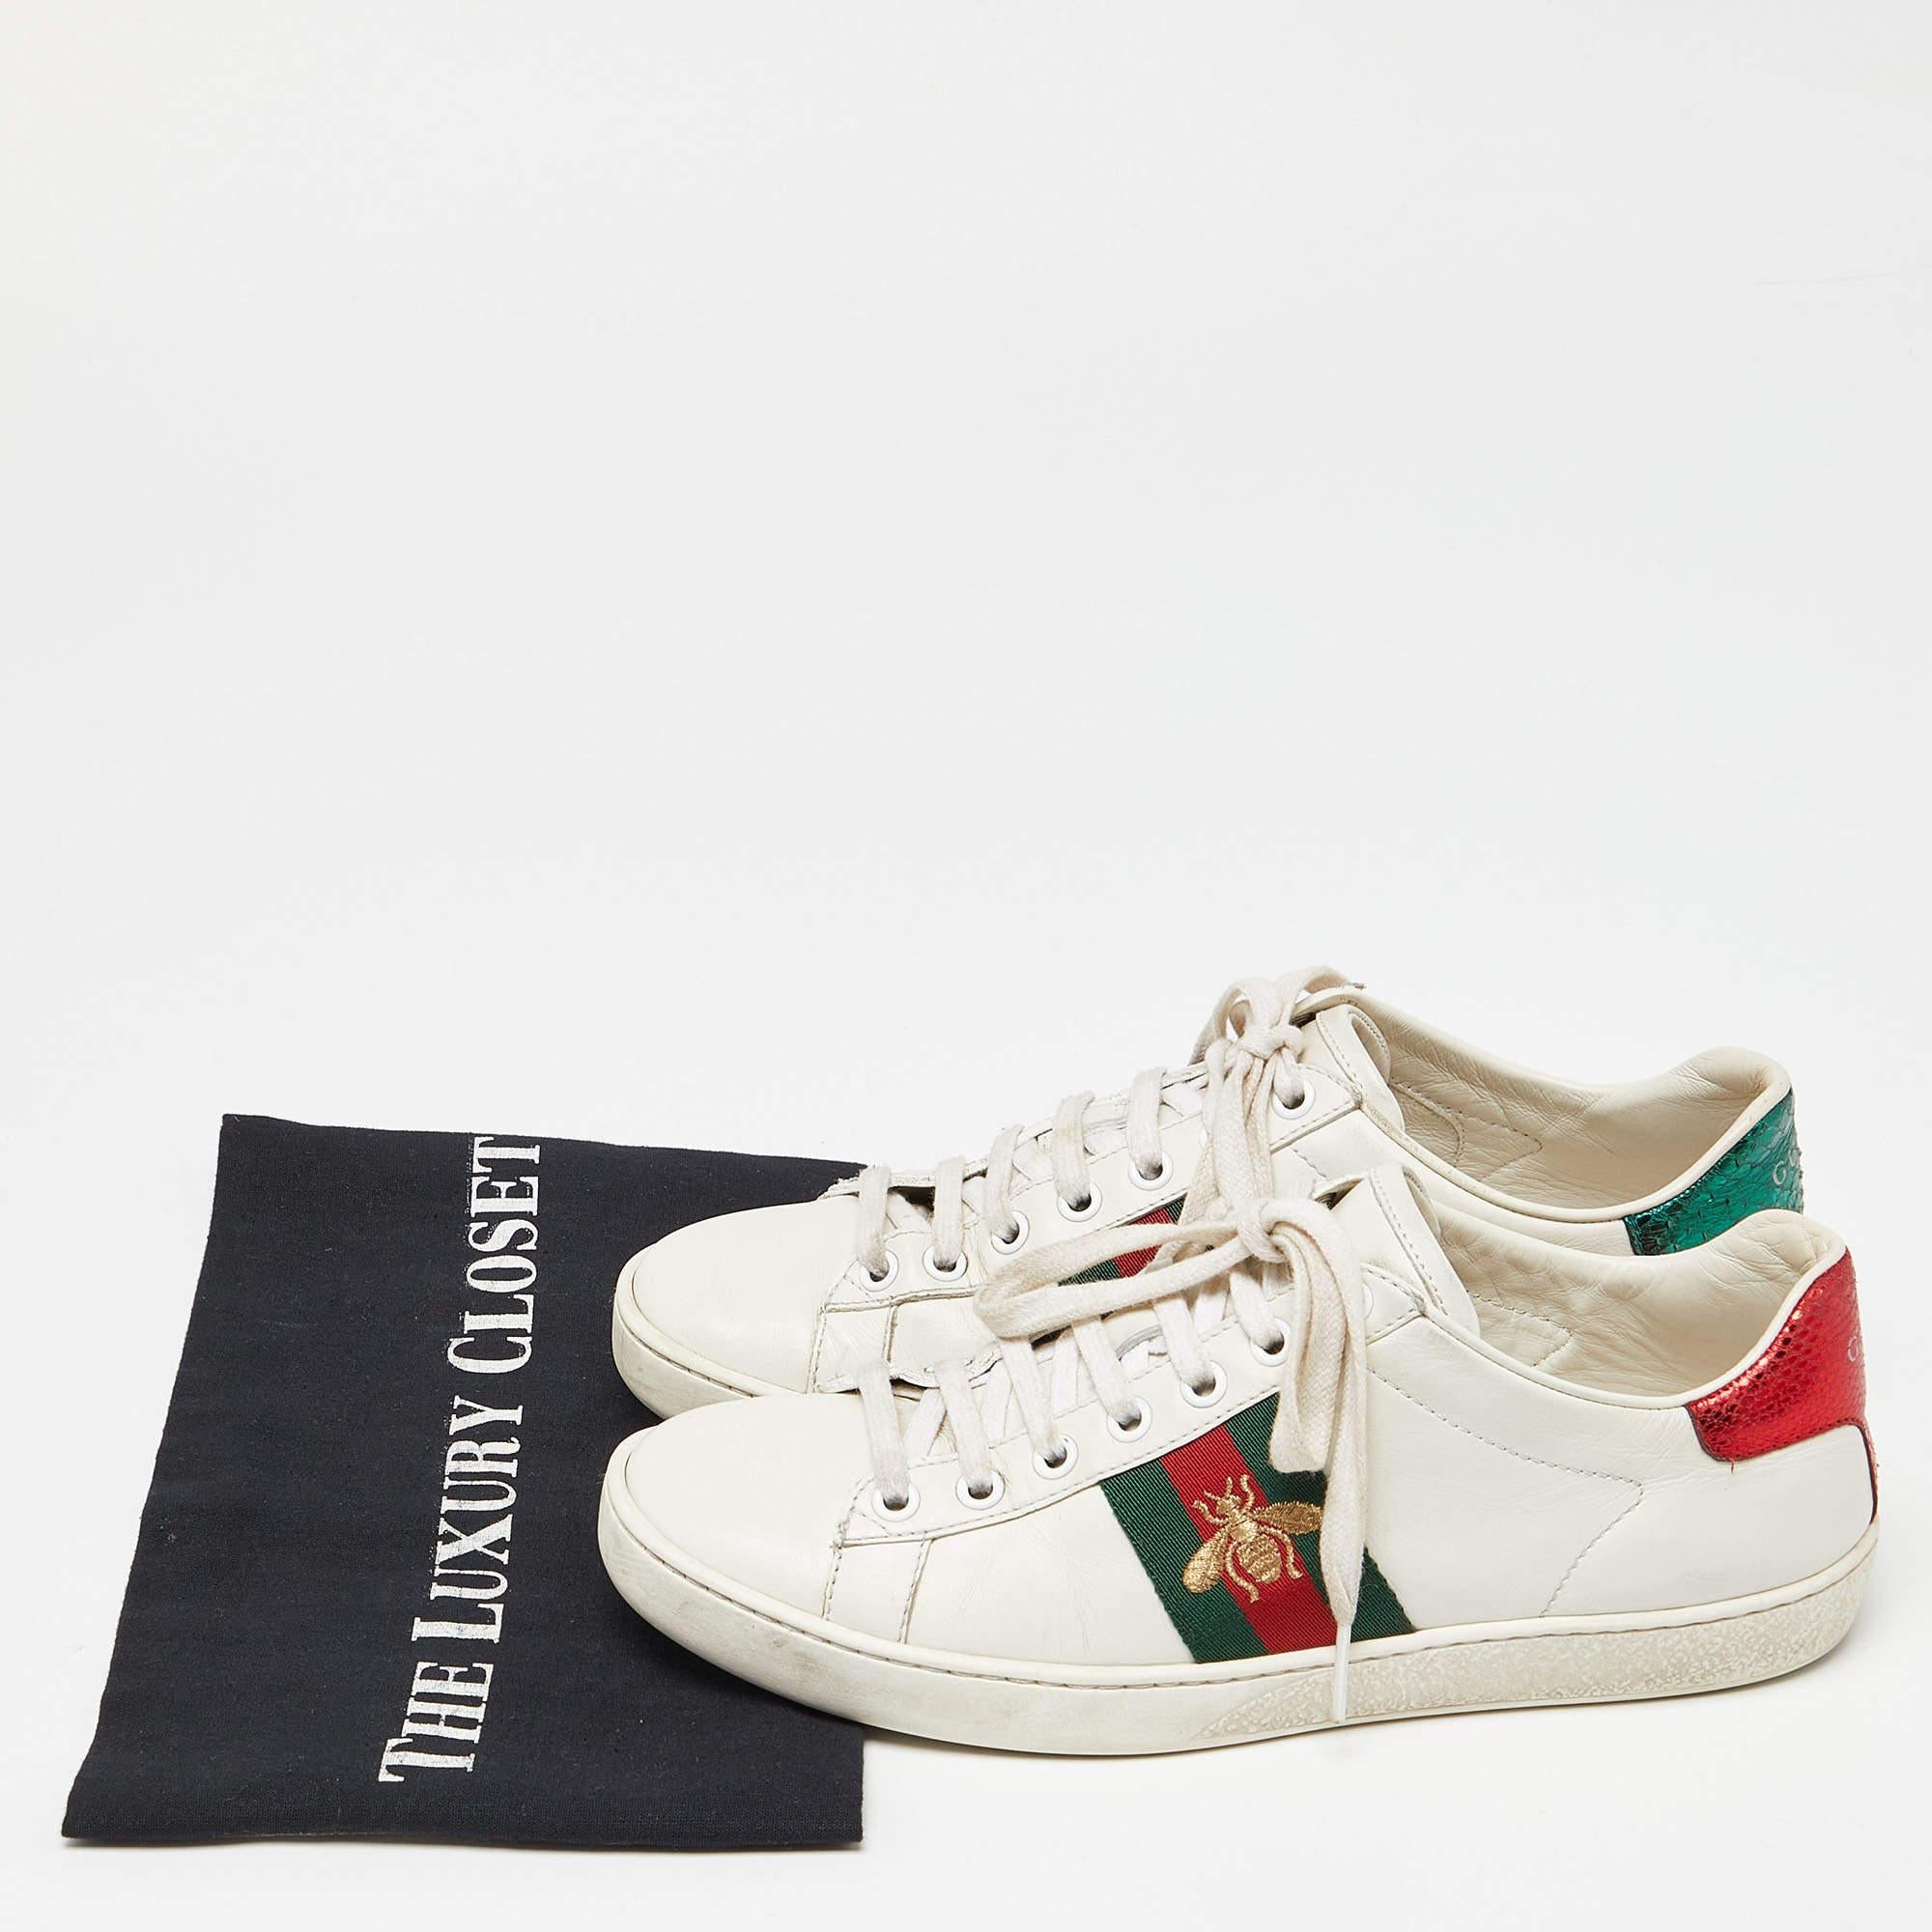 Gucci White Leather Web Detail Bee Embroidered Ace Low Top Sneakers Size 36.5 For Sale 5